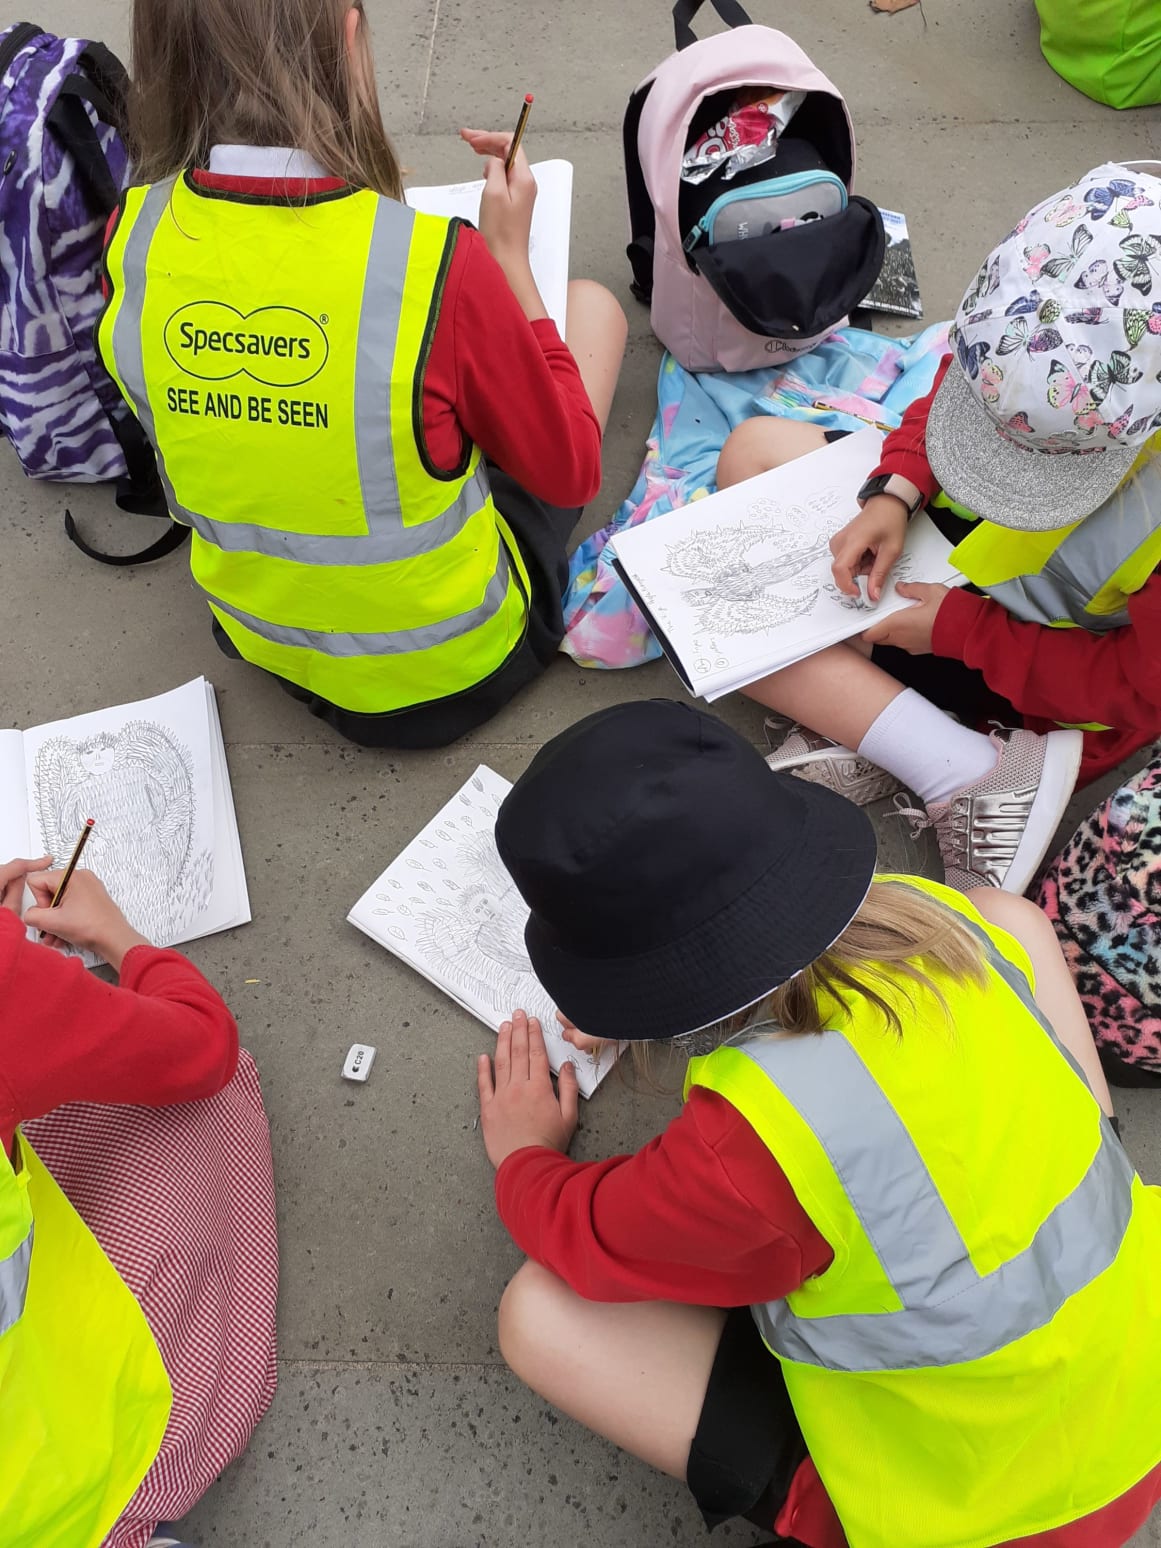 A group of schoolchildren sit on the floor outside filling in worksheets